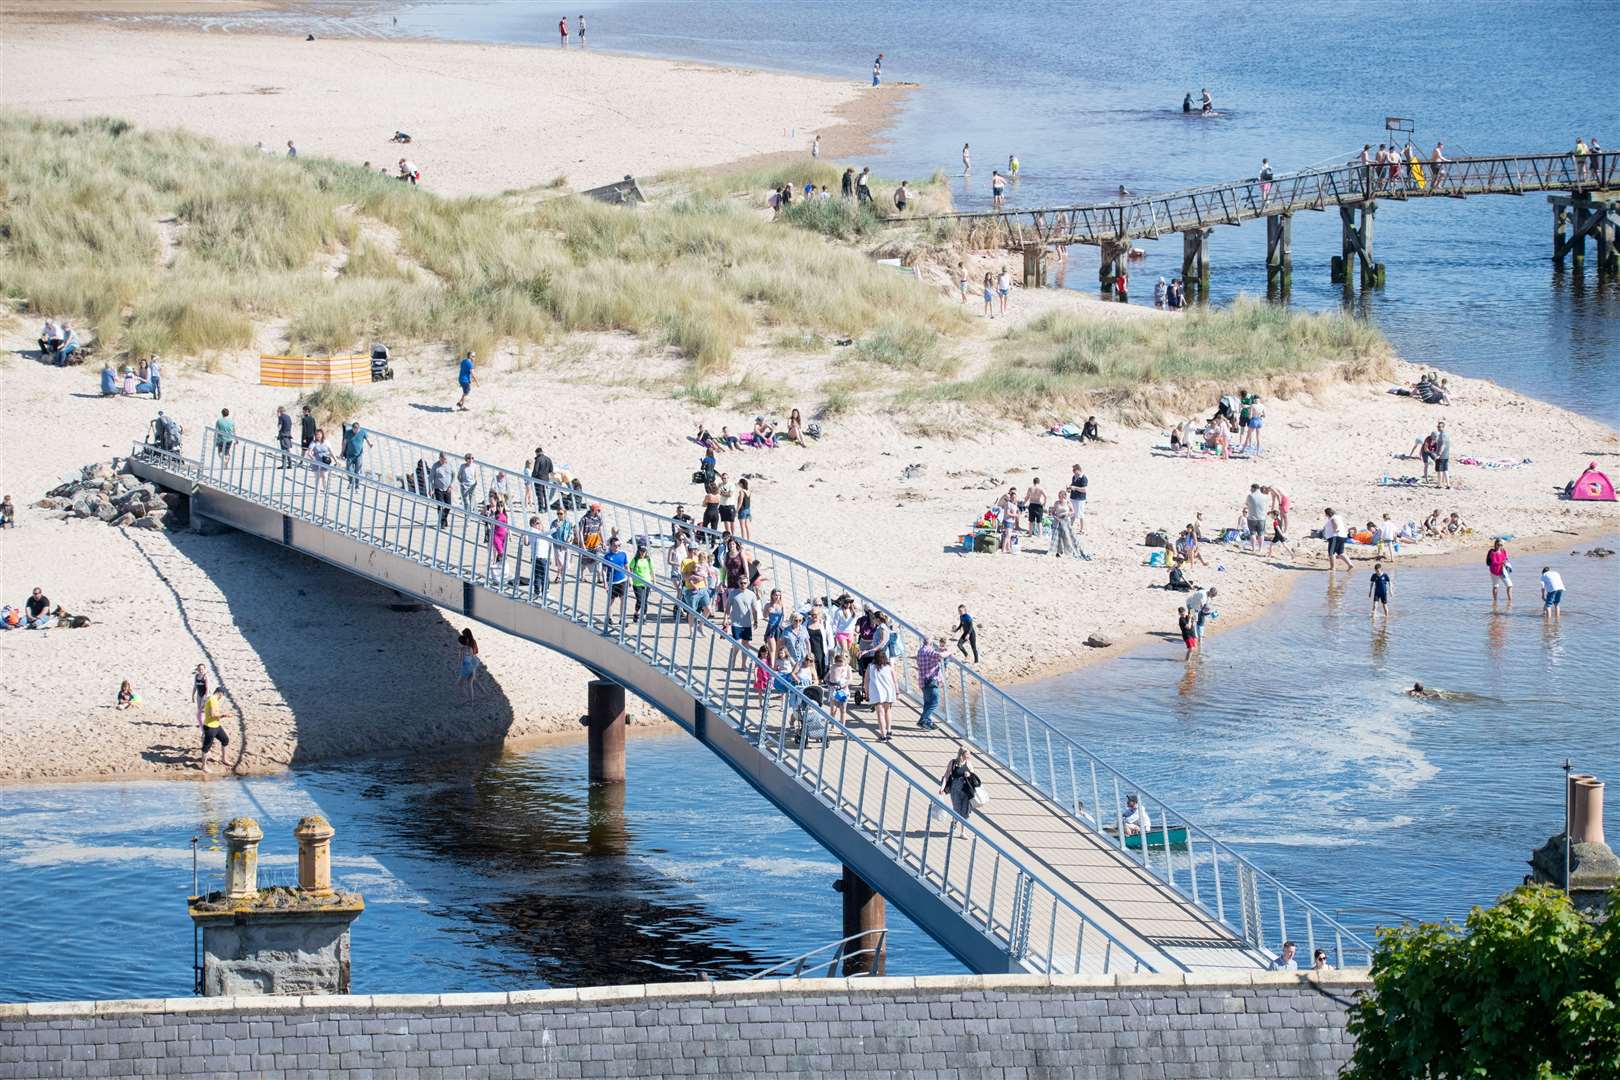 The new bridge makes it easy for visitors to access the stunning east beach. Picture: Daniel Forsyth